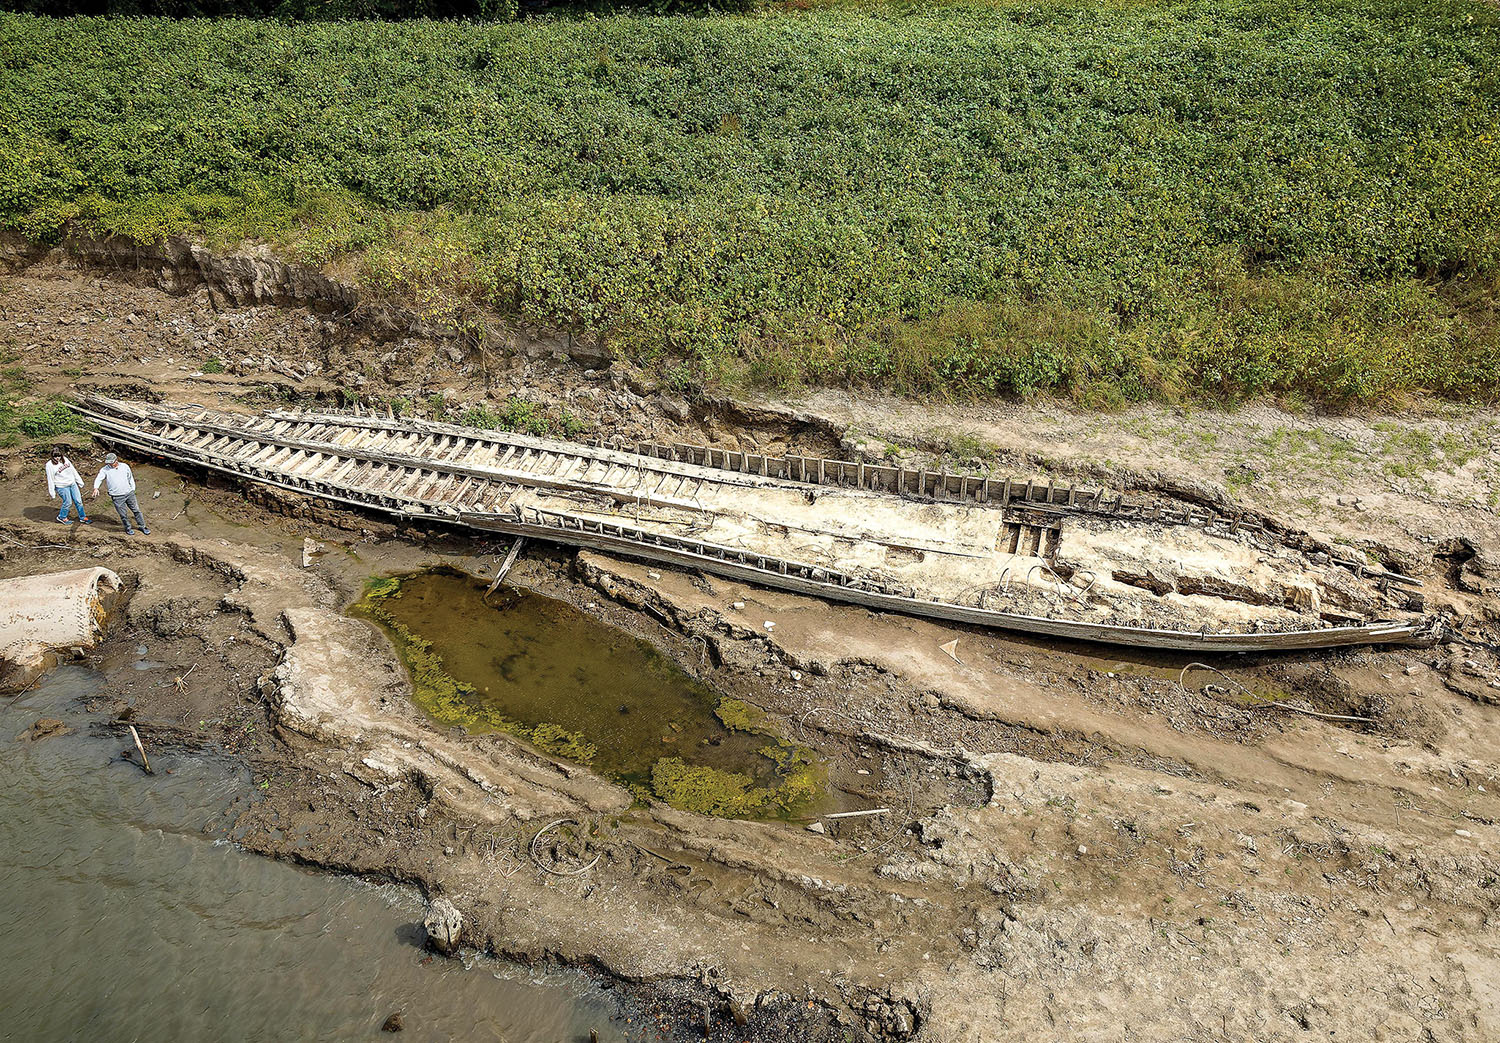 This wreck, exposed by the low water, is probably the remains of the ferry Brookhill, which sank at Baton Rouge in 1915. (Photo courtesy of P.J. Hahn